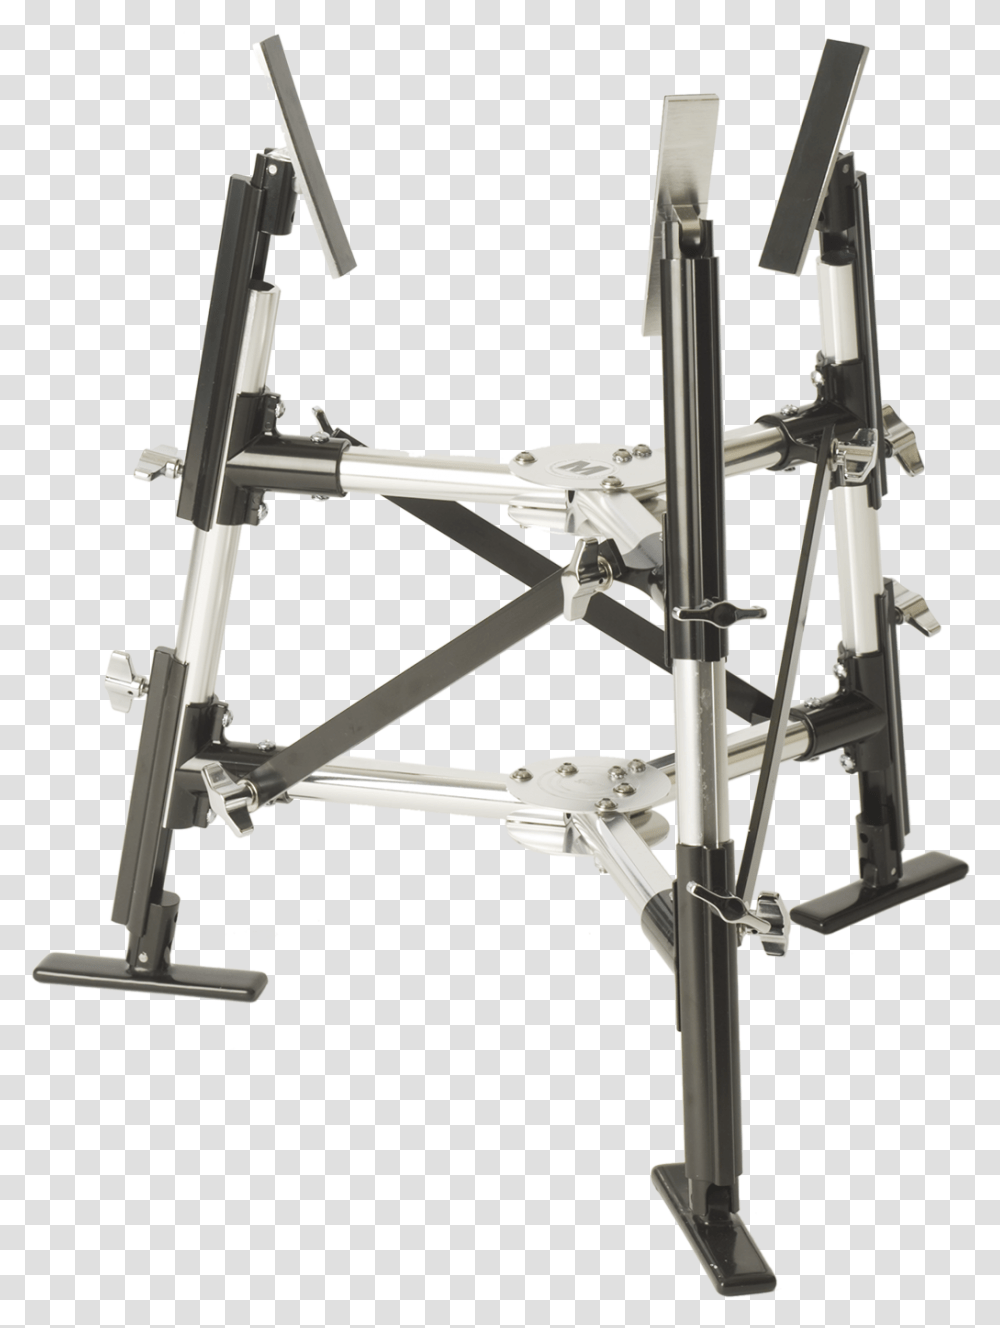 Gon Bops Conga Stand, Utility Pole, Tool, Vise, Pedal Transparent Png